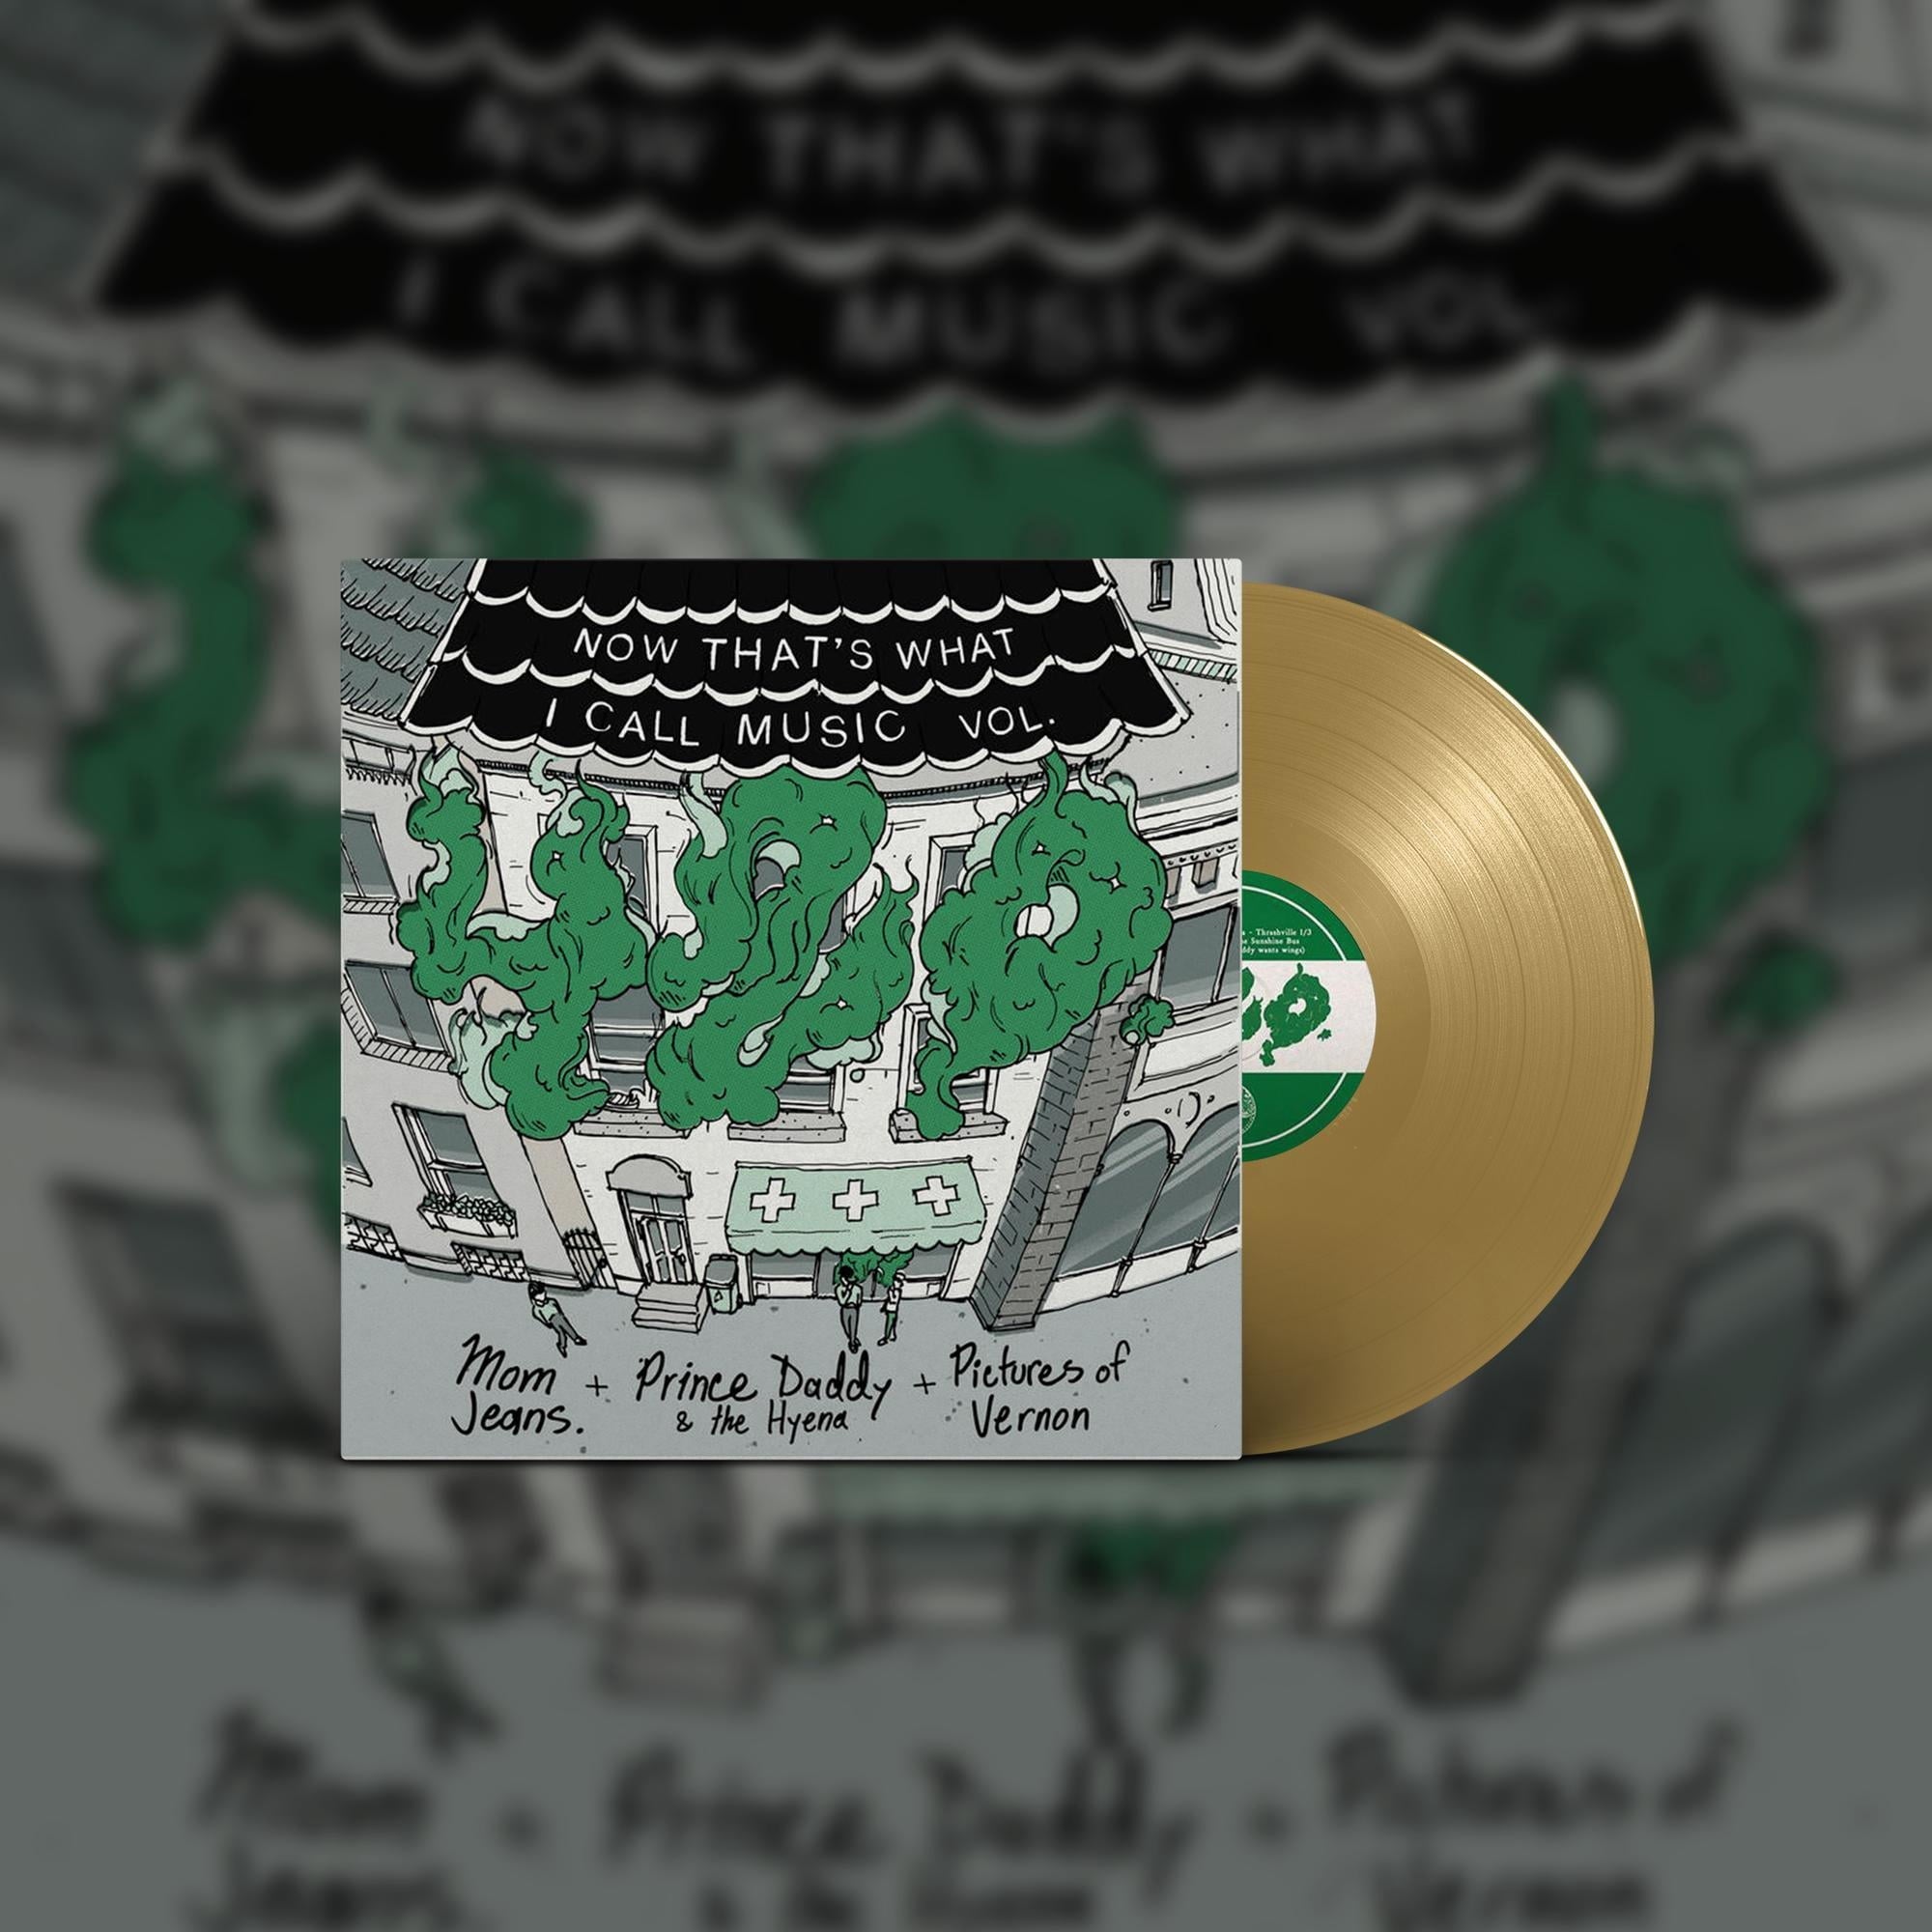 Mom Jeans / Prince Daddy & the Hyena / Pictures of Vernon: Now That's What I Call Music: Vol. 420: Gold 10" Vinyl